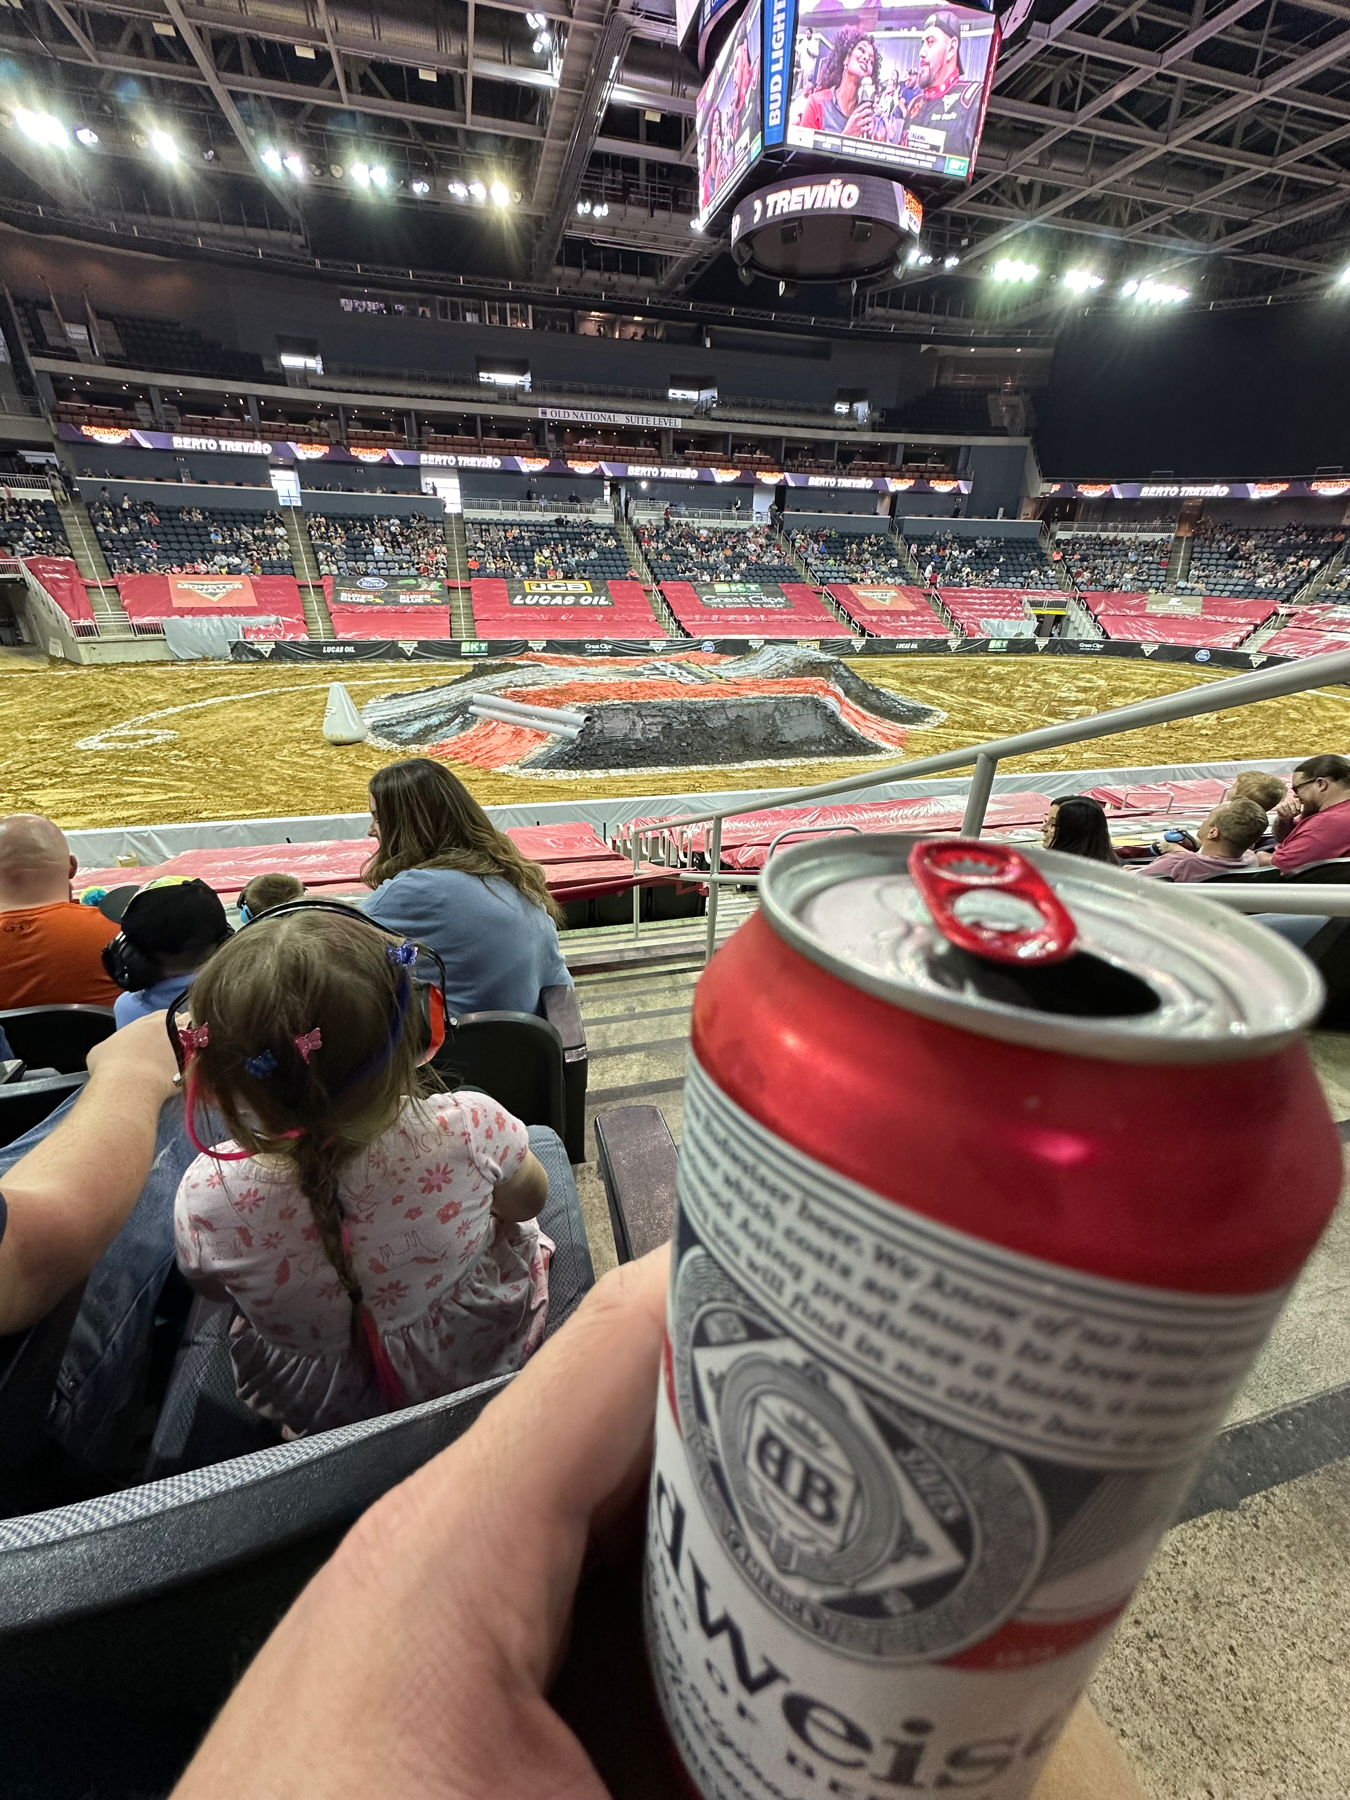 Person holding a canned beverage at a motorsport event in an arena, with dirt tracks prepared for competition. Spectators are seated, and a large overhead display shows event content.